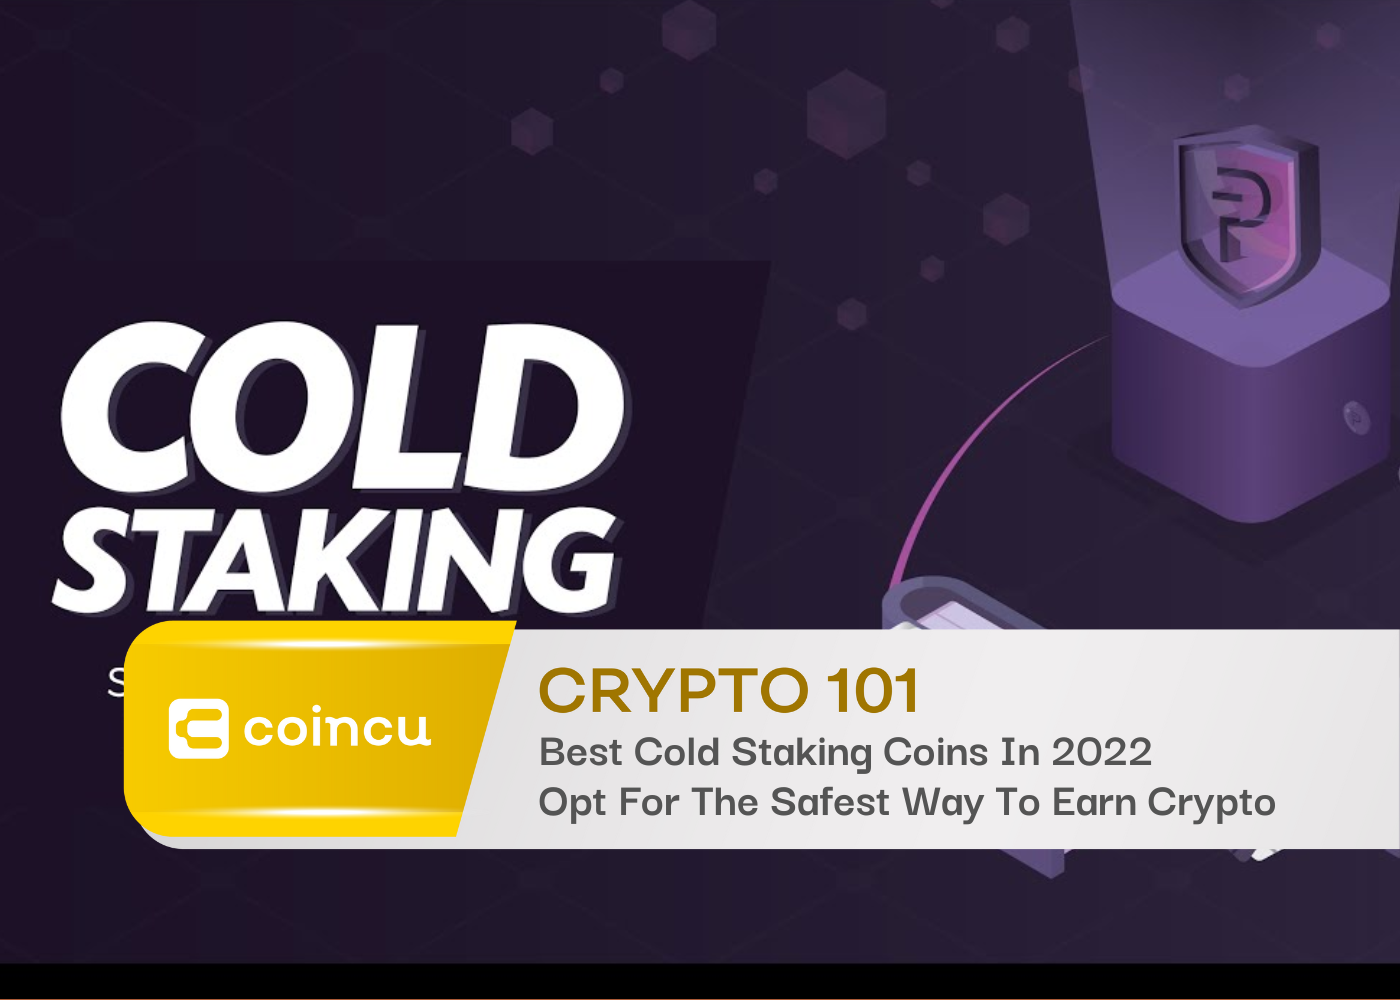 Best Cold Staking Coins In 2022